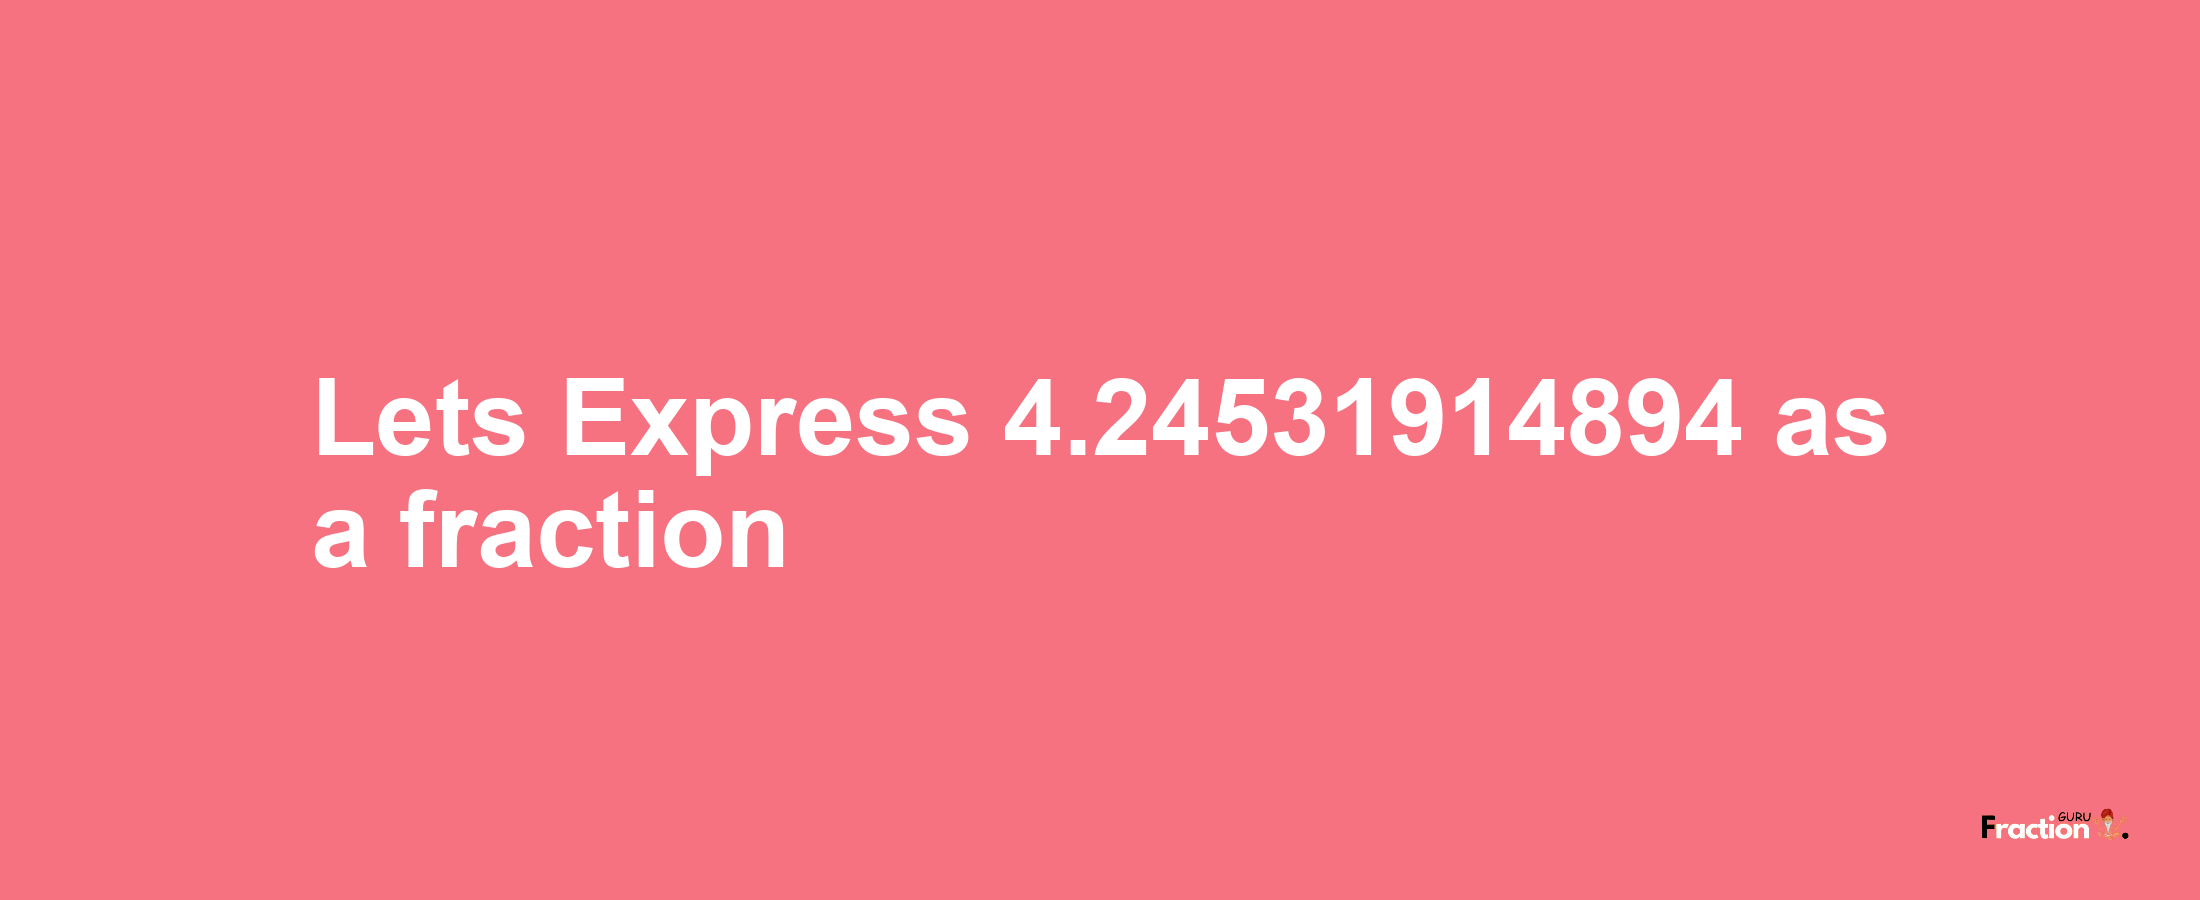 Lets Express 4.24531914894 as afraction